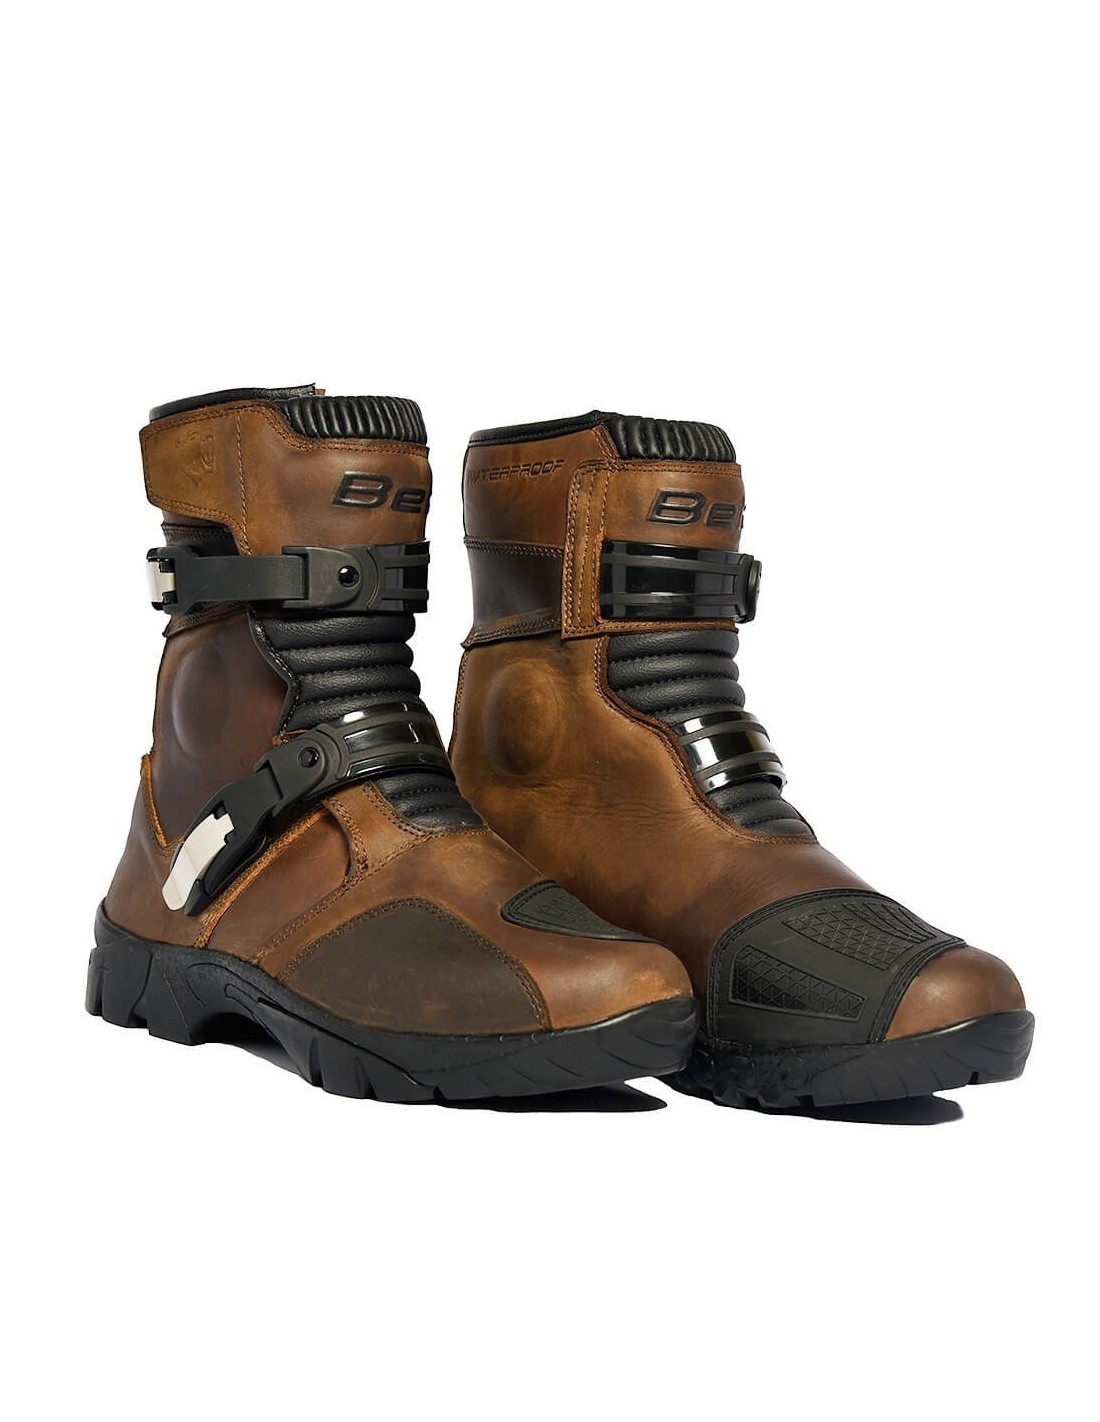 waterproof touring motorcycle boots